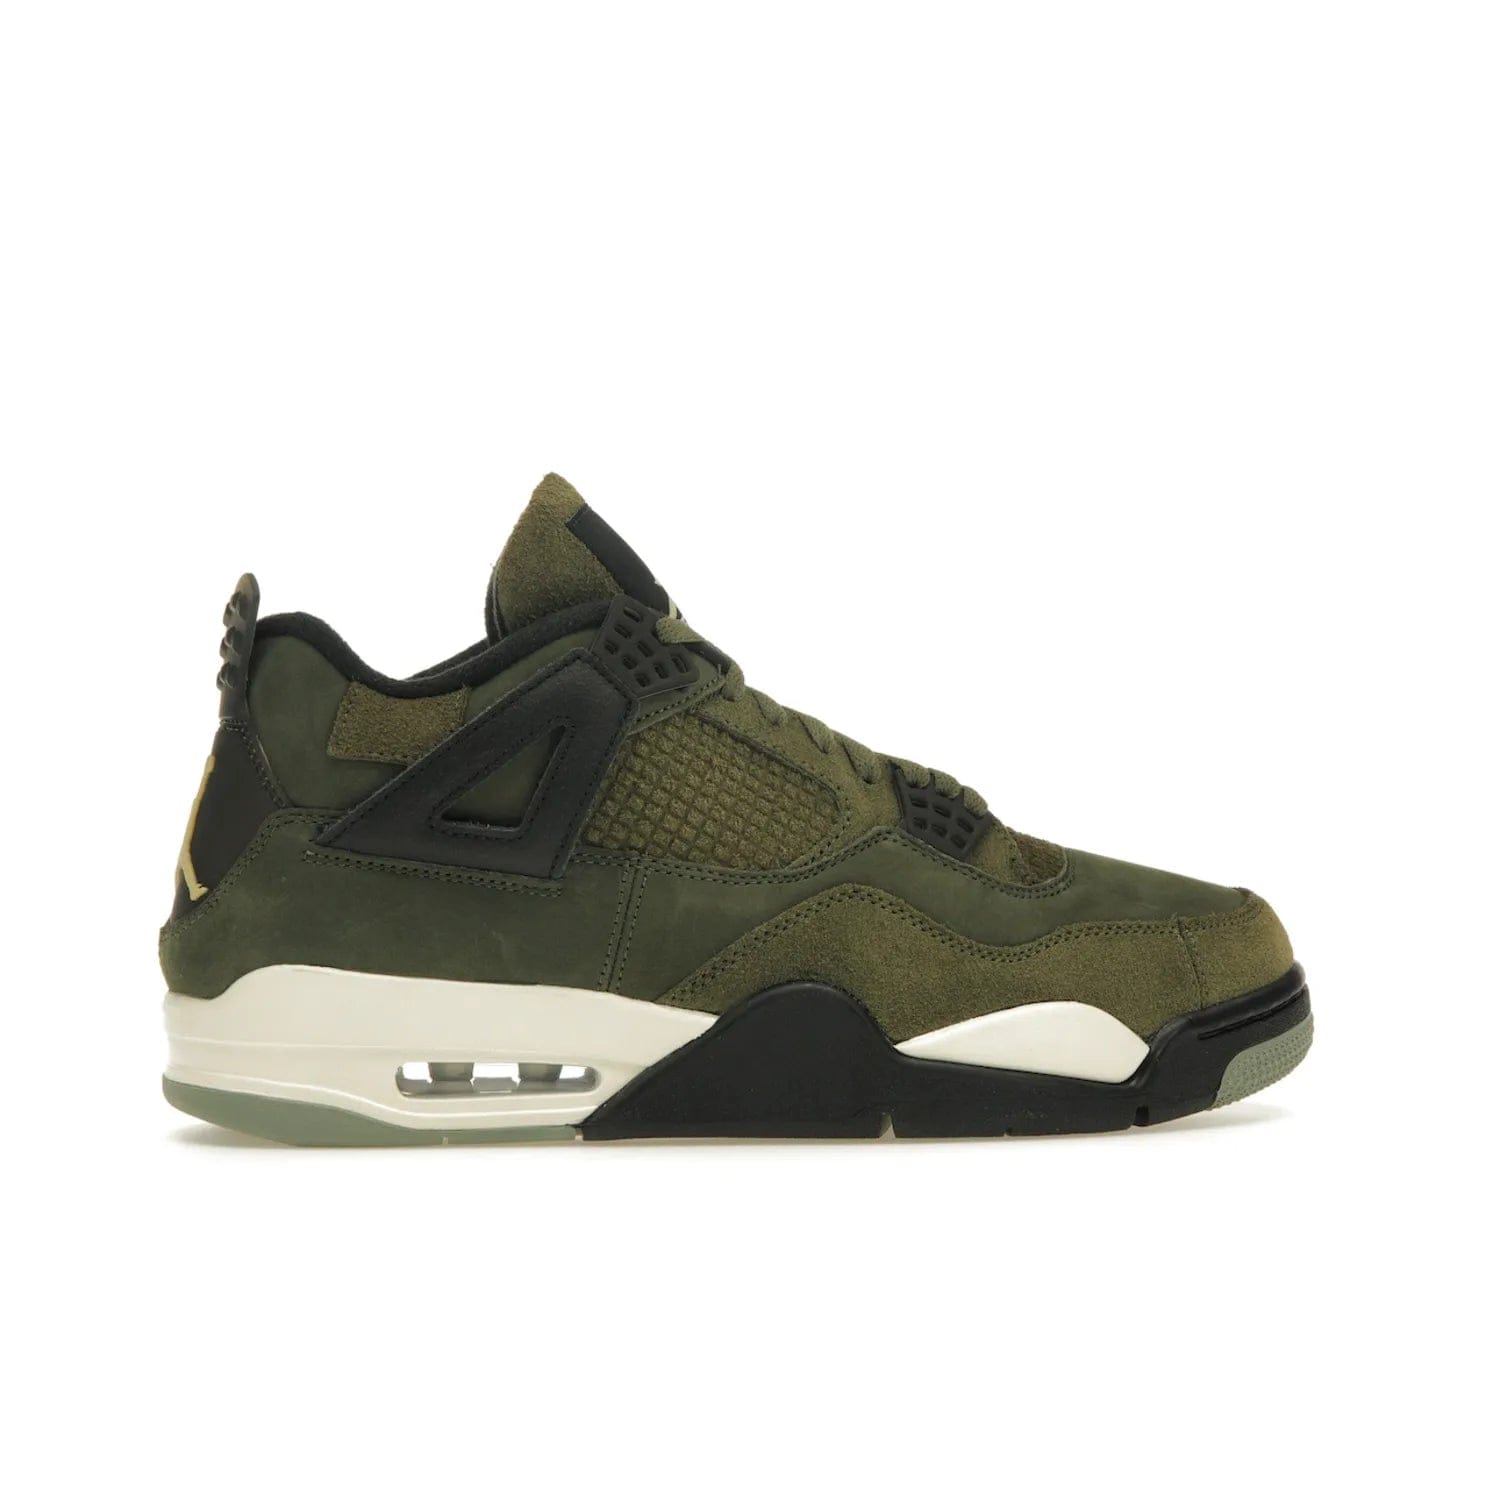 Jordan 4 Retro SE Craft Medium Olive - Image 36 - Only at www.BallersClubKickz.com - Grab the Jordan 4 Retro SE Crafts for a unique style. Combines Medium Olive, Pale Vanilla, Khaki, Black and Sail, with same classic shape, cushioning, and rubber outsole. Available on November 18th!